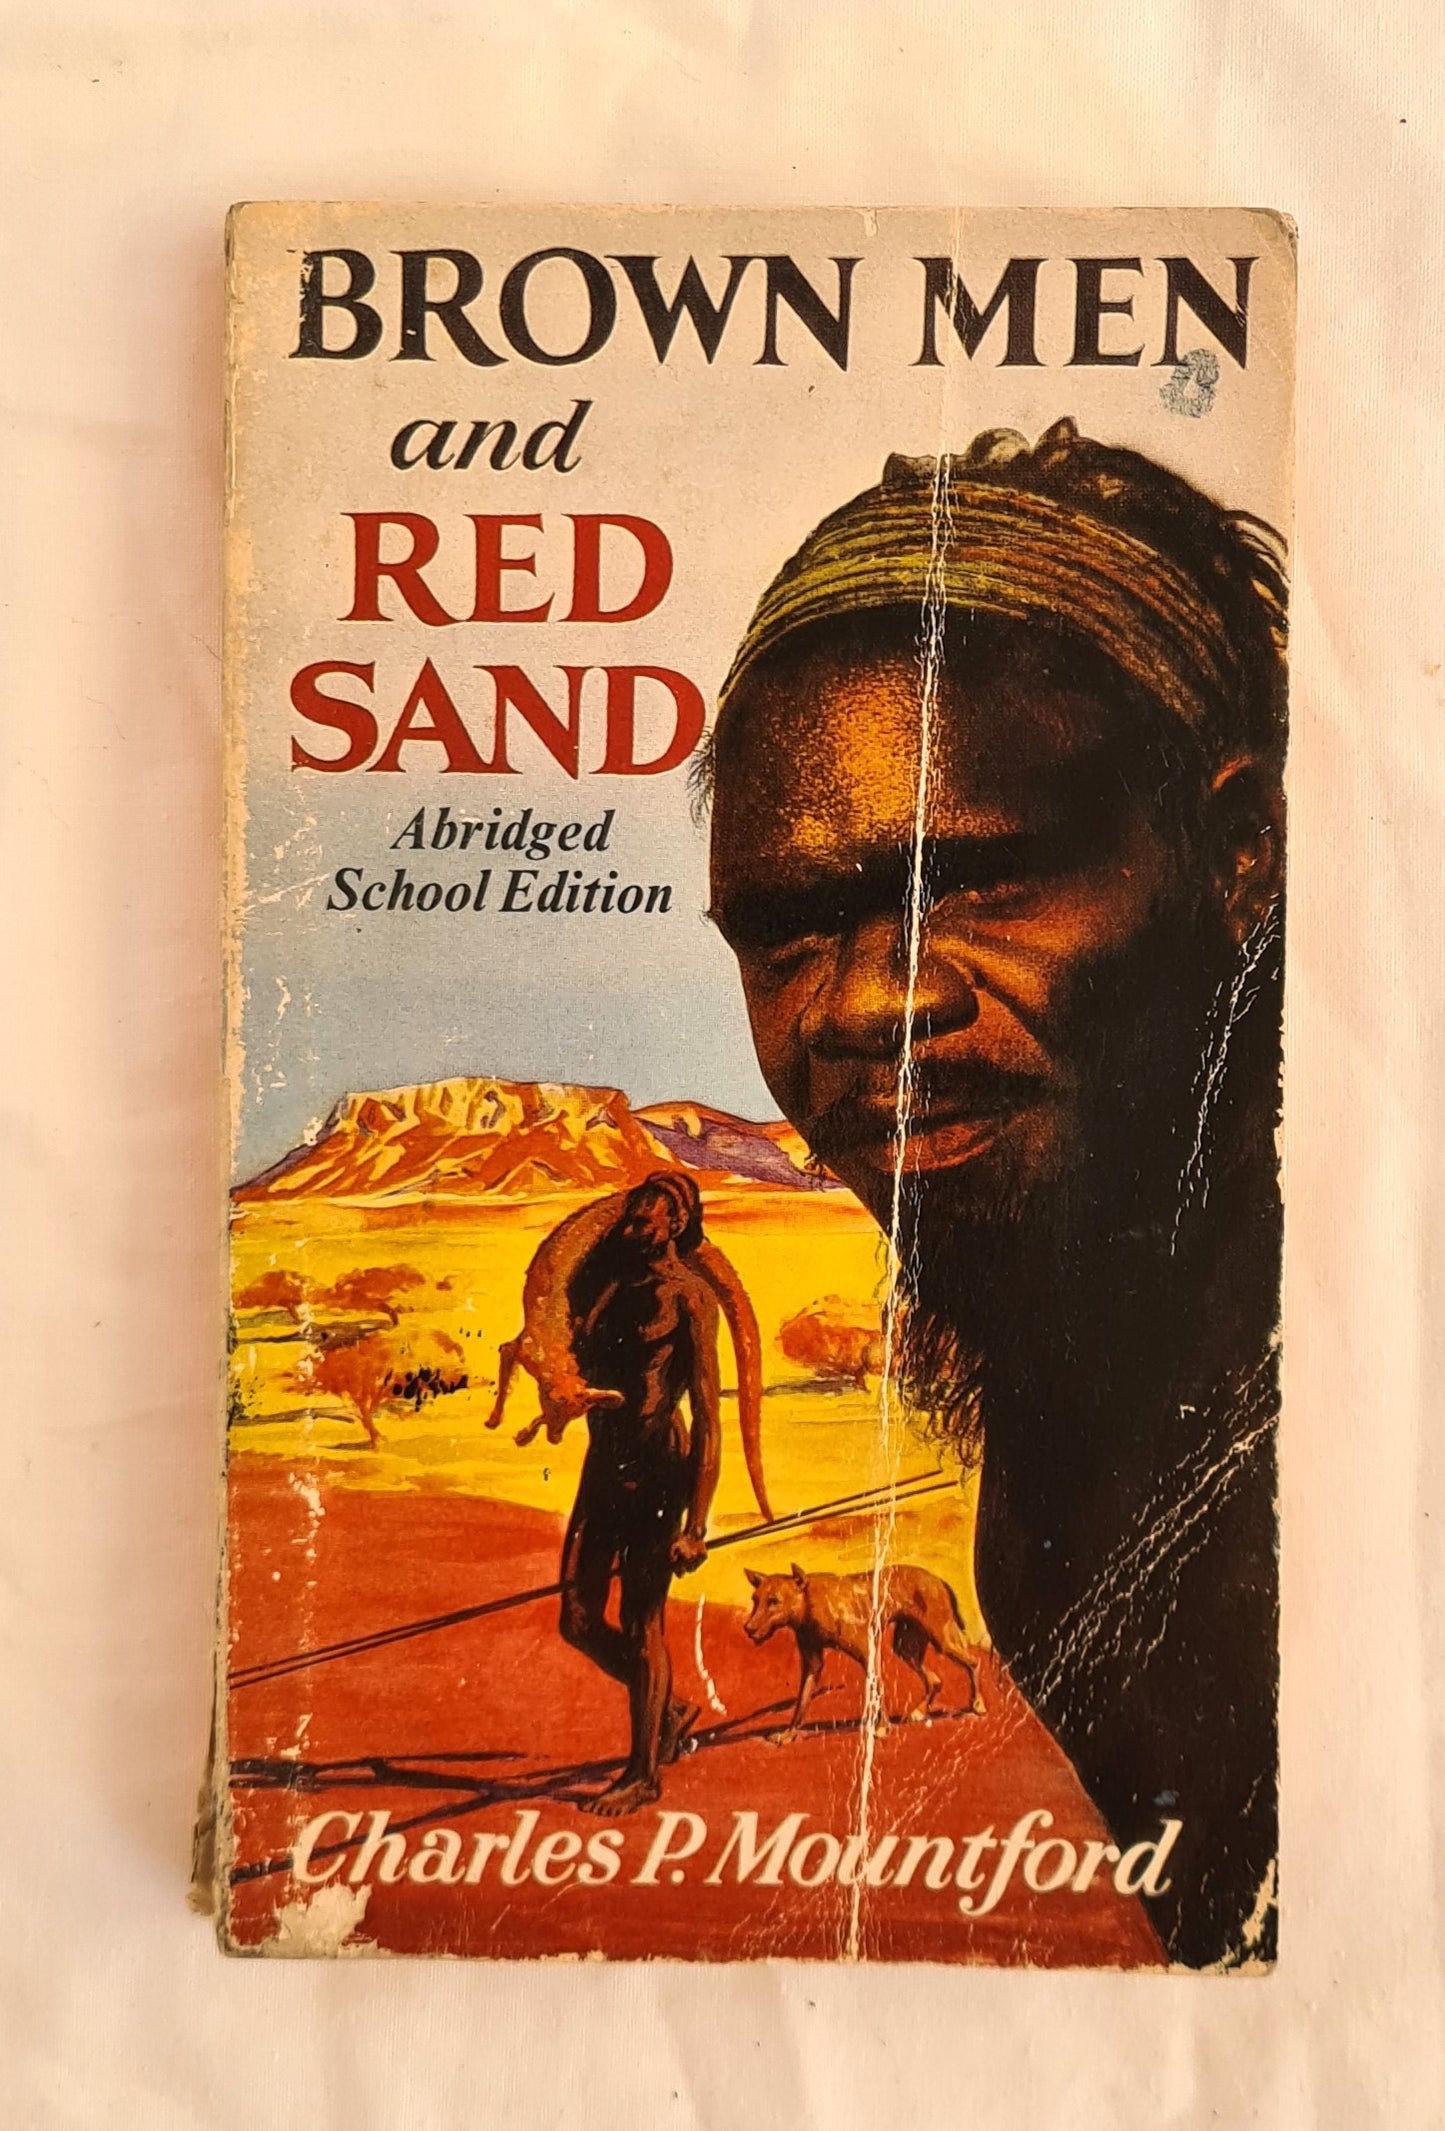 Brown Men and Red Sand  Journeyings in Wild Australia  by Charles P. Mountford  Abridged School Edition